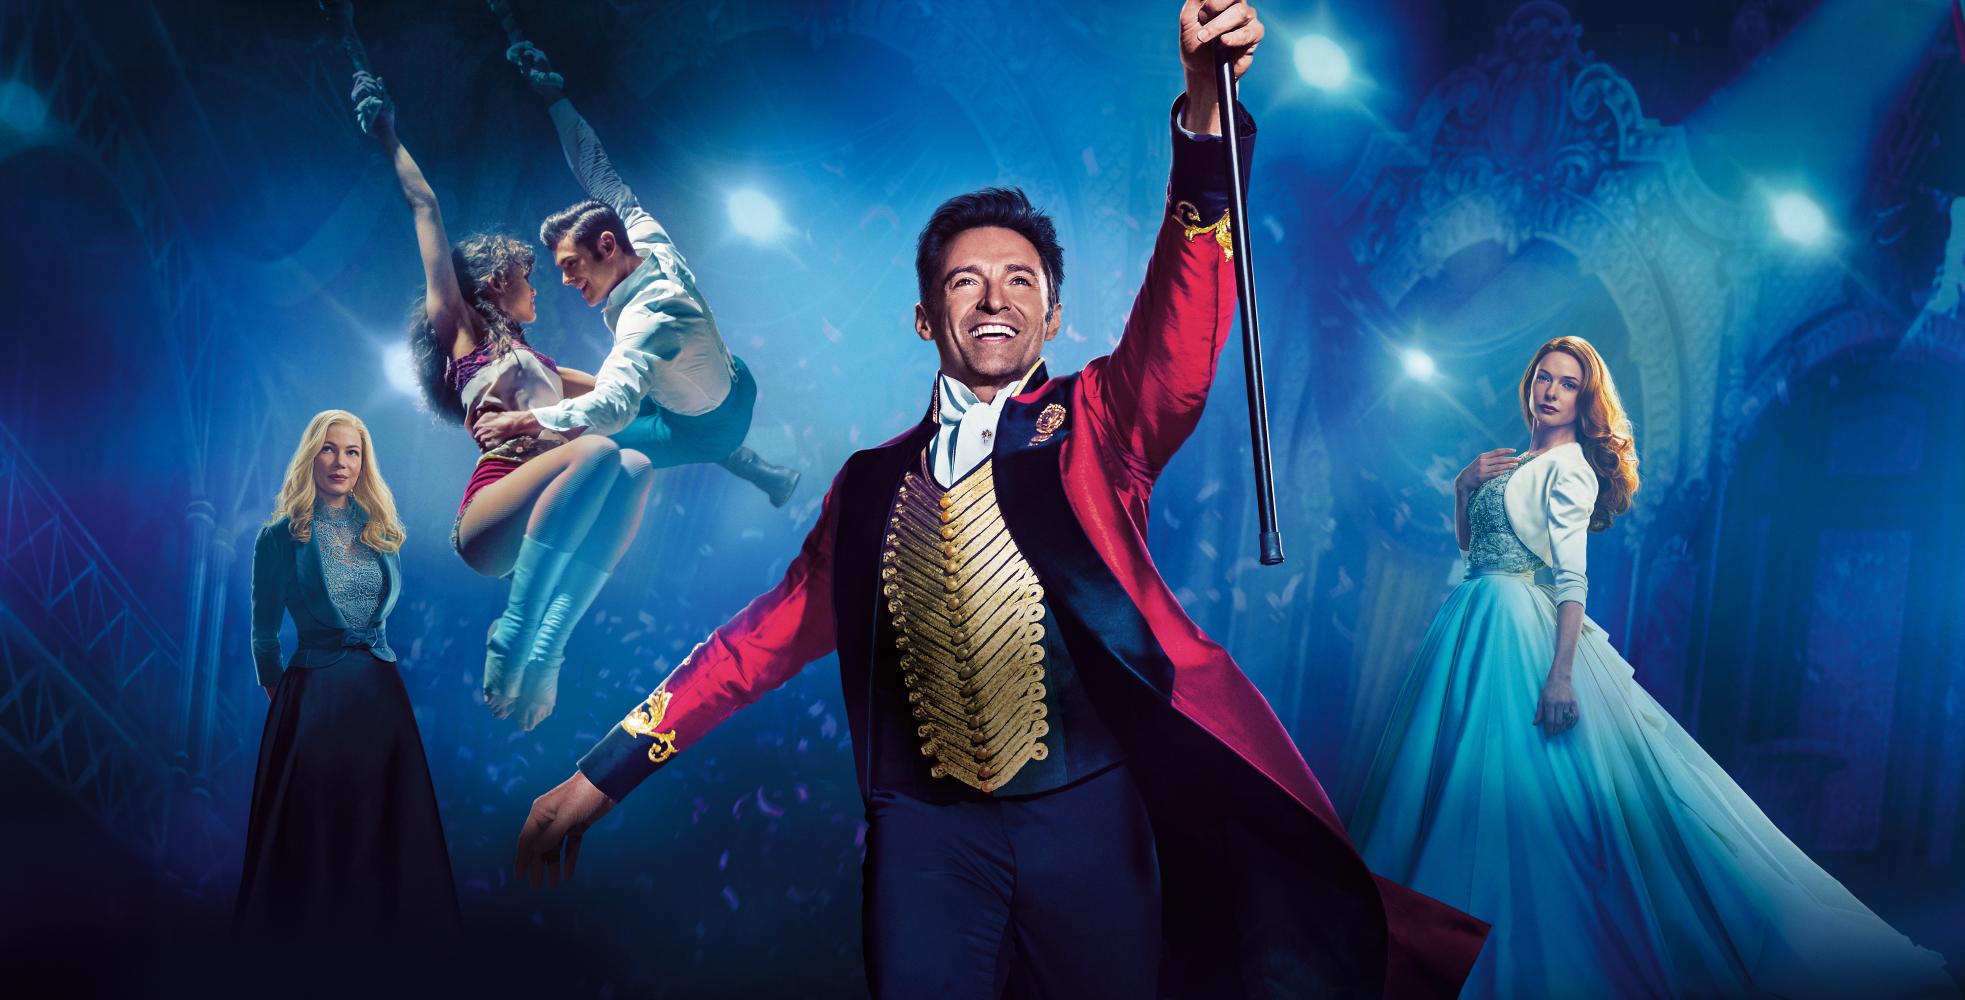 Is The Greatest Showman Based On A True Story?